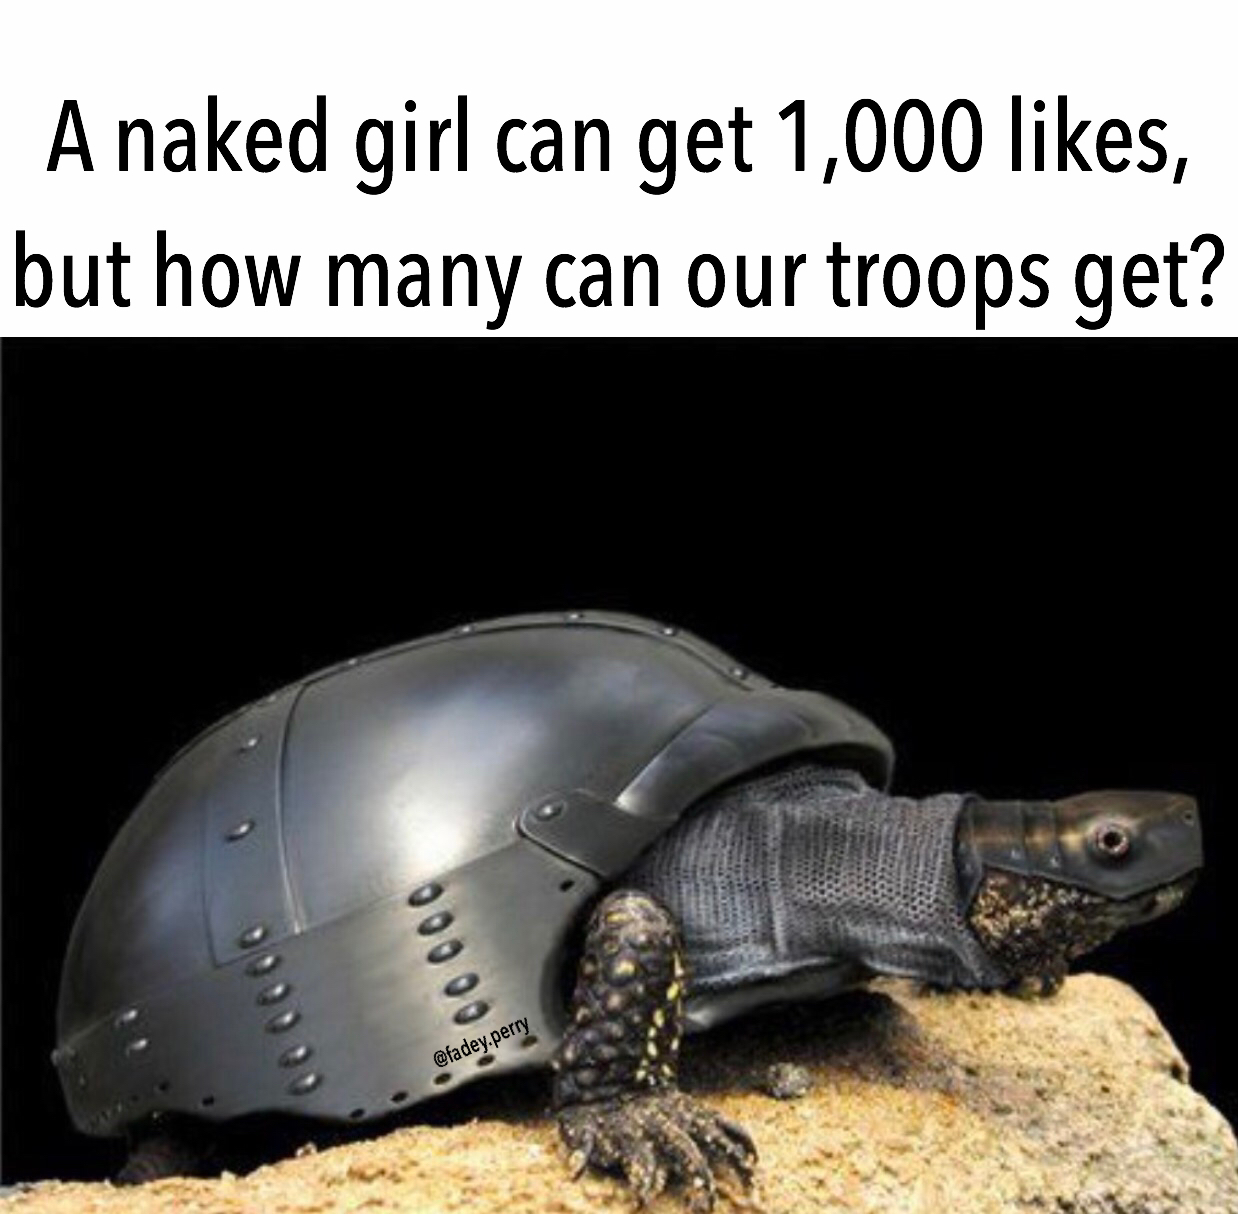 armored animals - A naked girl can get 1,000 , but how many can our troops get?